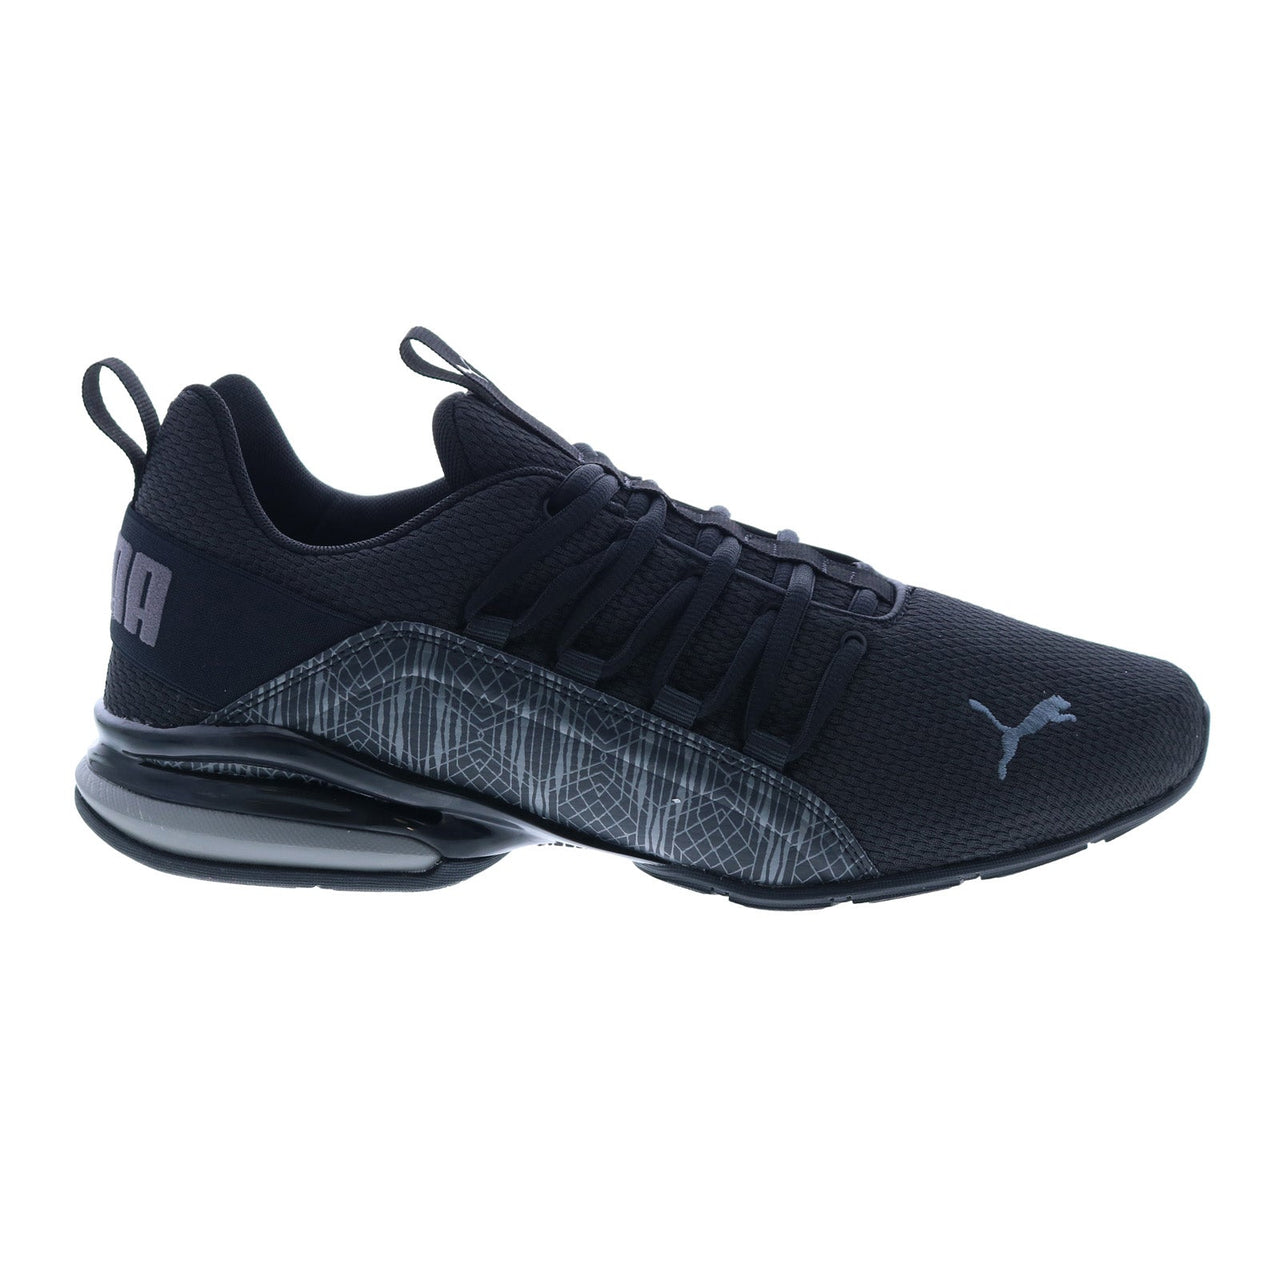 Puma Axelion Graphic 19425201 Mens Black Canvas Athletic Running Shoes ...